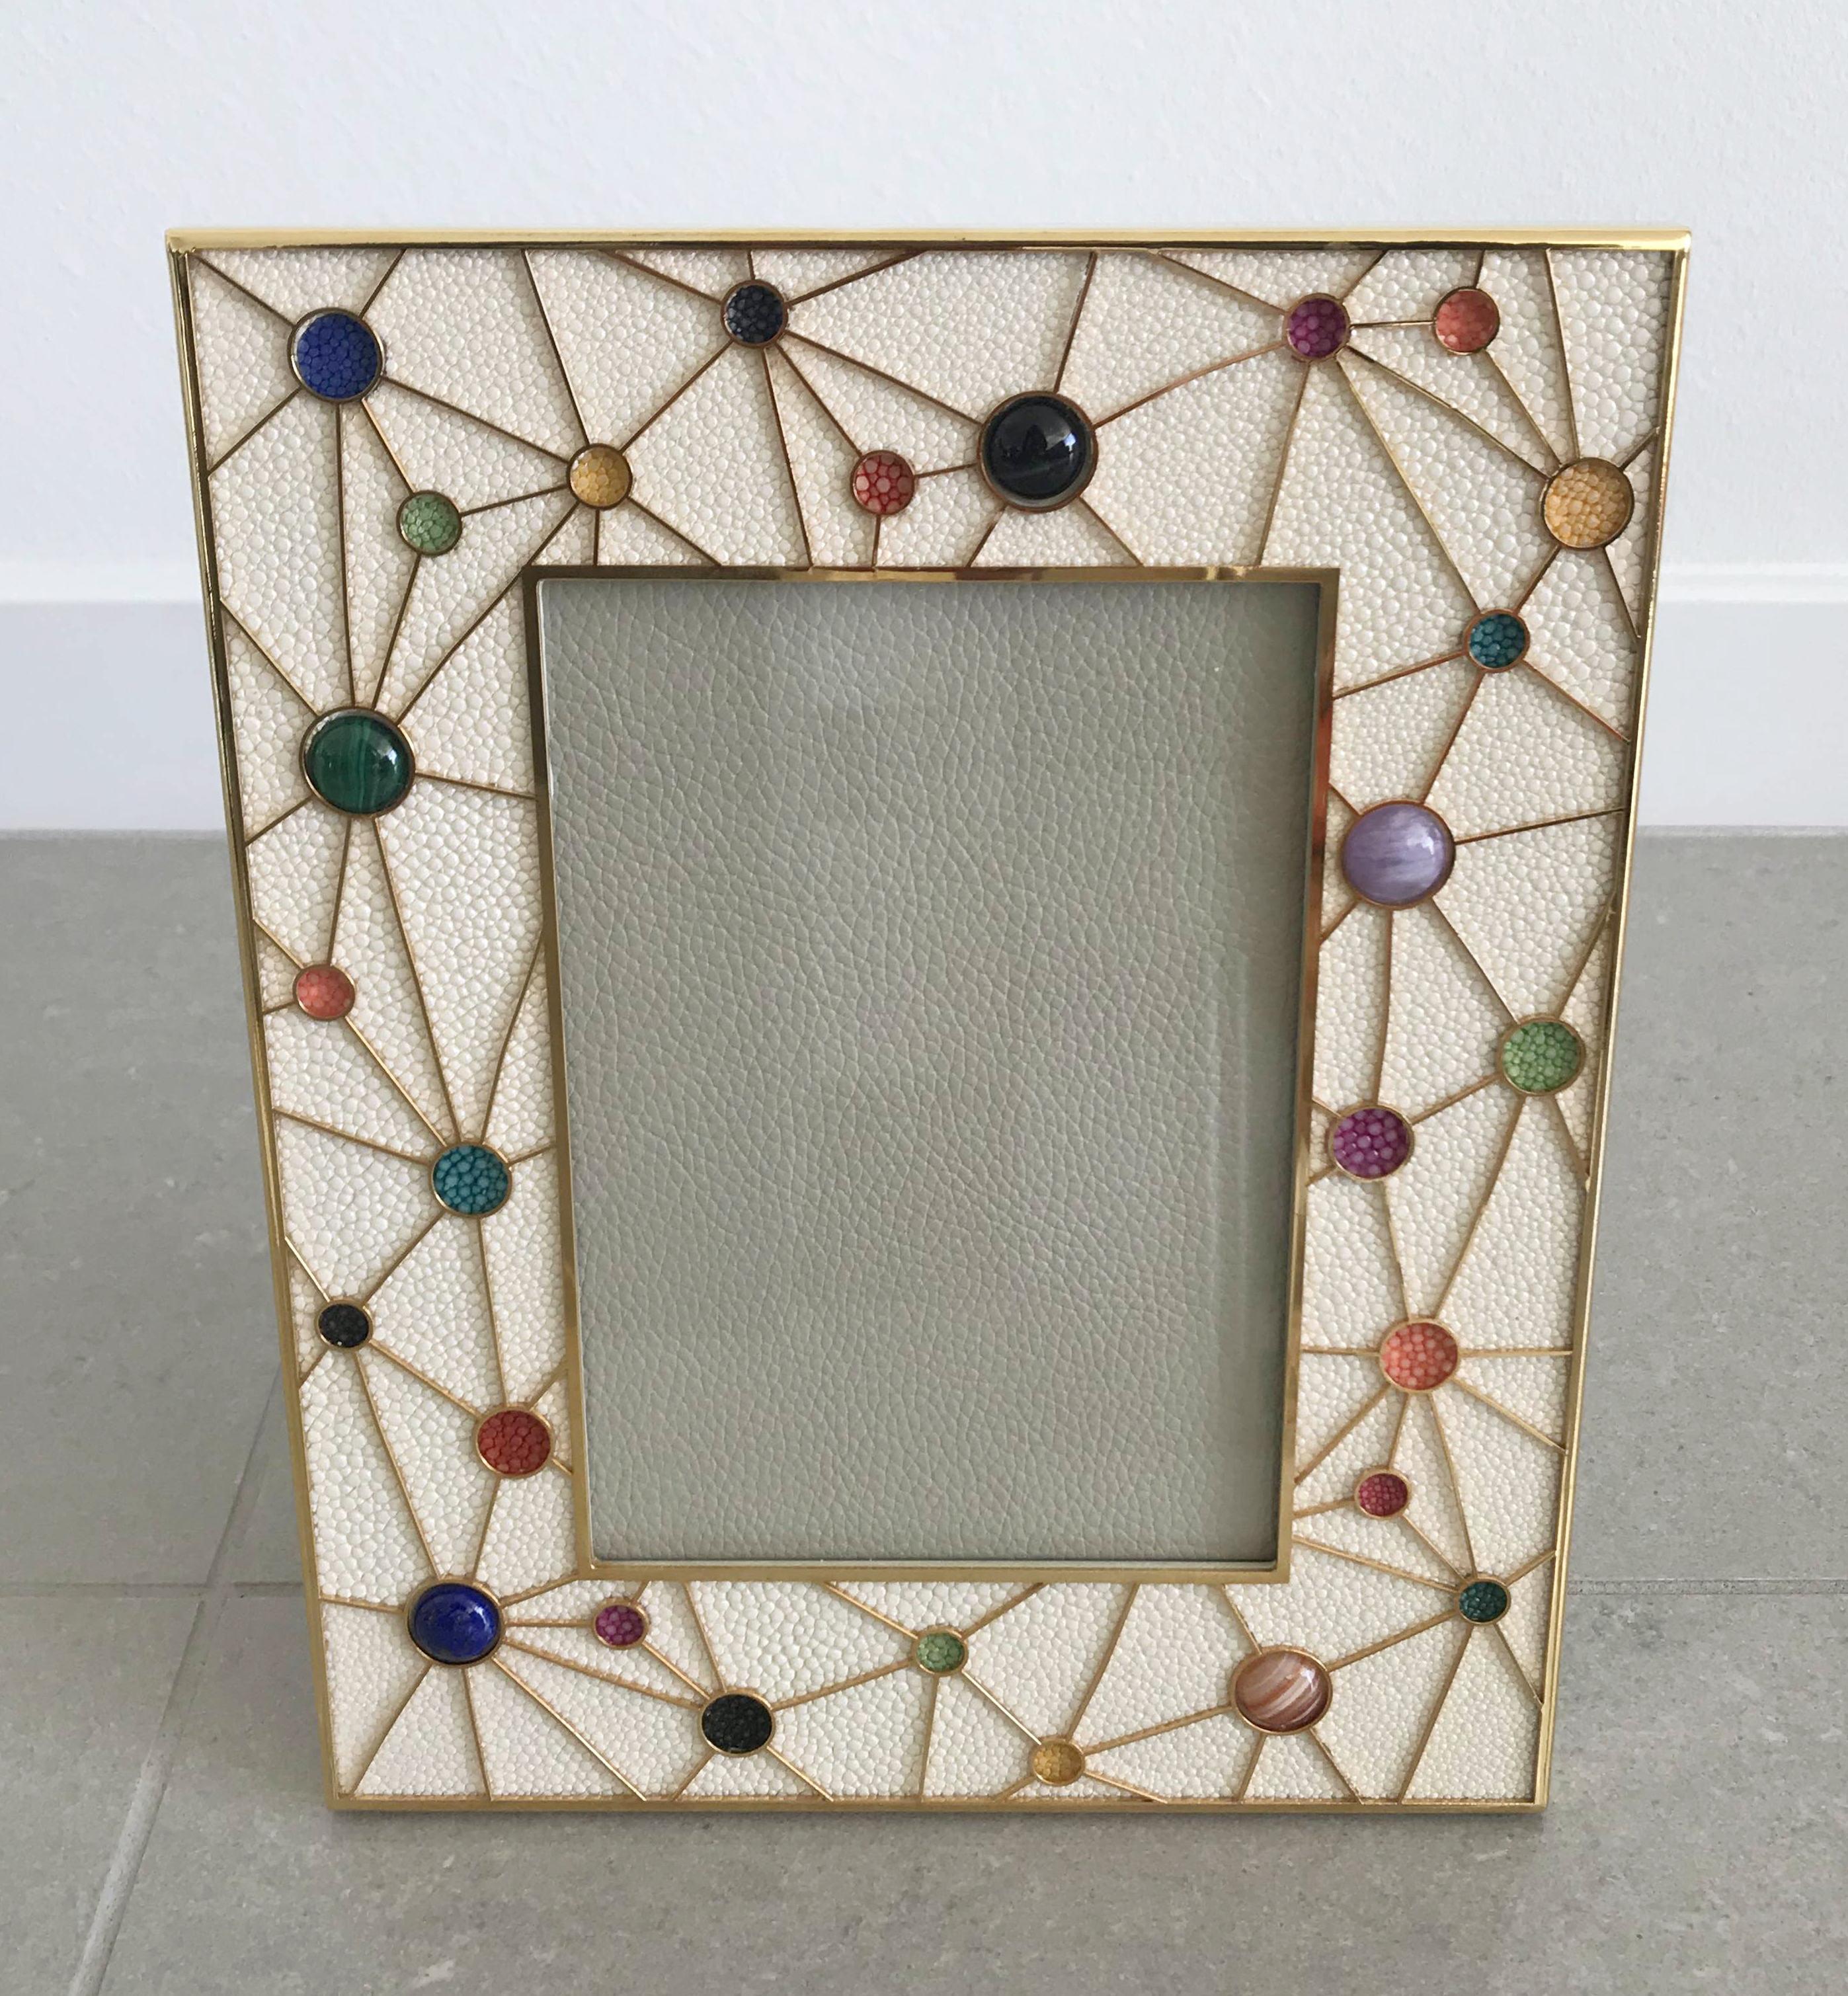 Ivory shagreen leather with multi-color stone inserts and gold-plated picture frame by Fabio Ltd
Measures: Height 10.5 inches, width 8.5 inches, depth 1 inch
Photo size: 5 inches by 7 inches
LAST 1 in stock in Los Angeles
Order Reference #: FABIOLTD